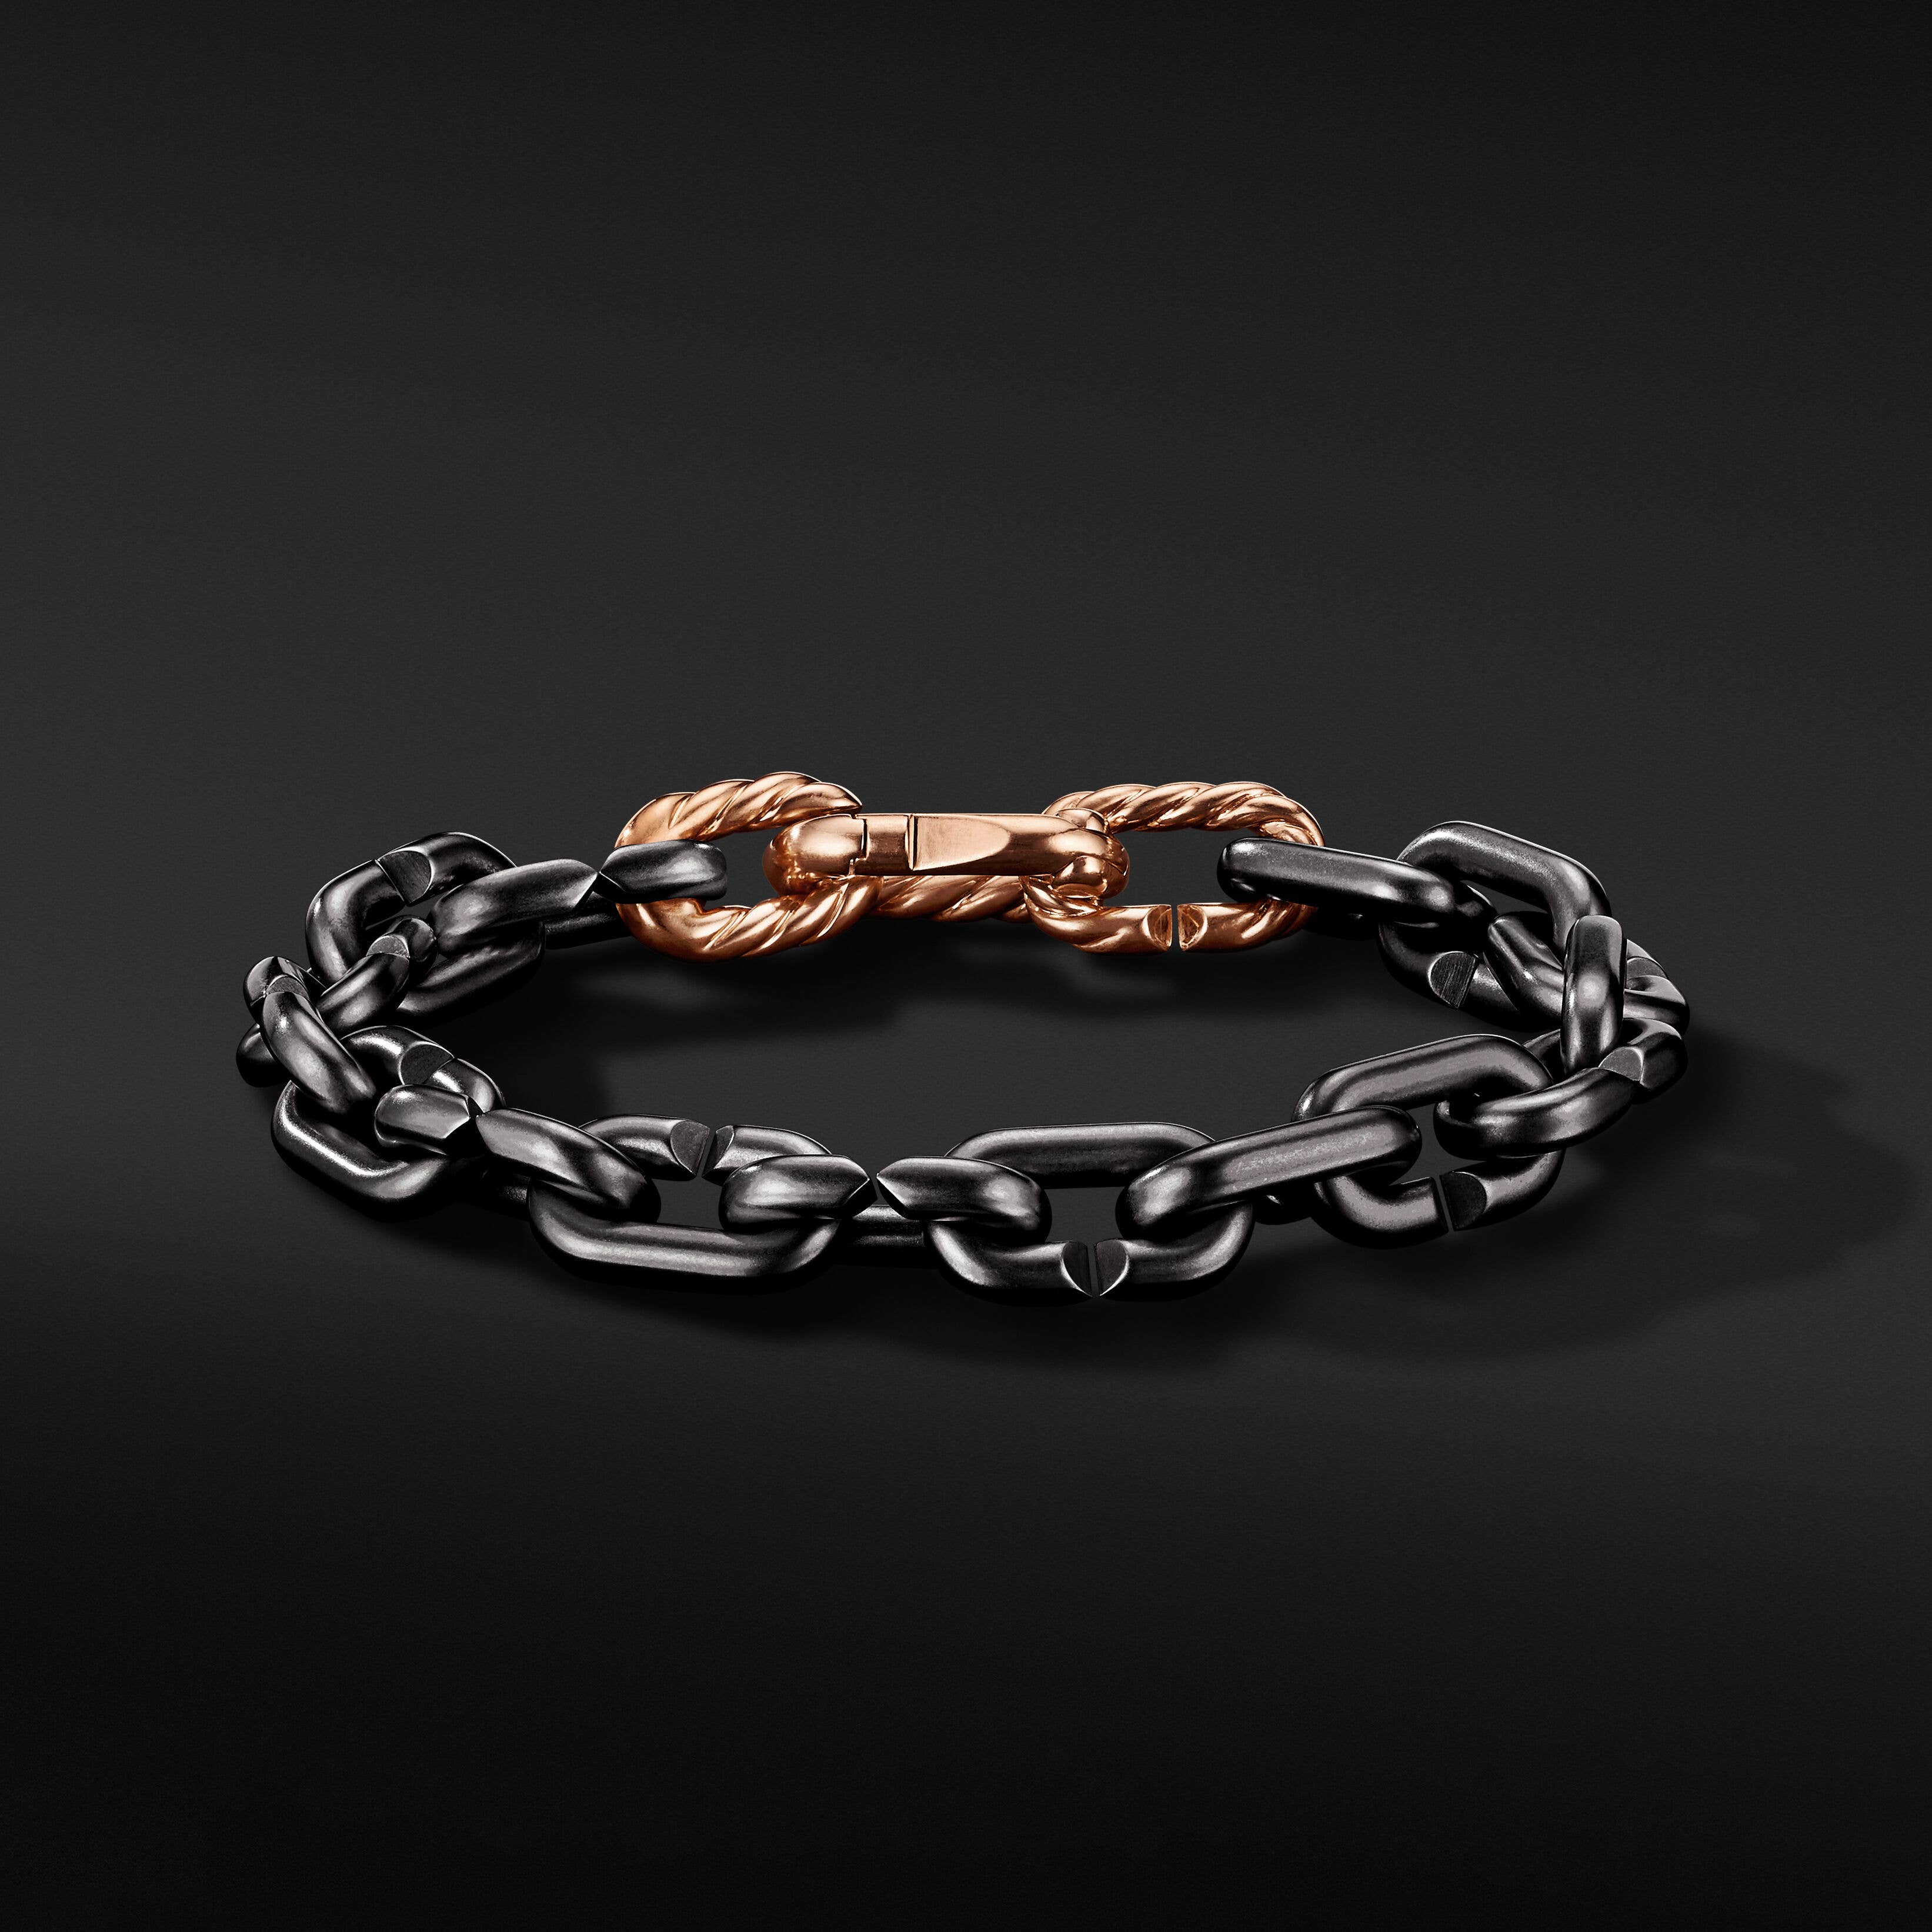 Chain Links Bracelet with Grey Titanium and 18K Rose Gold